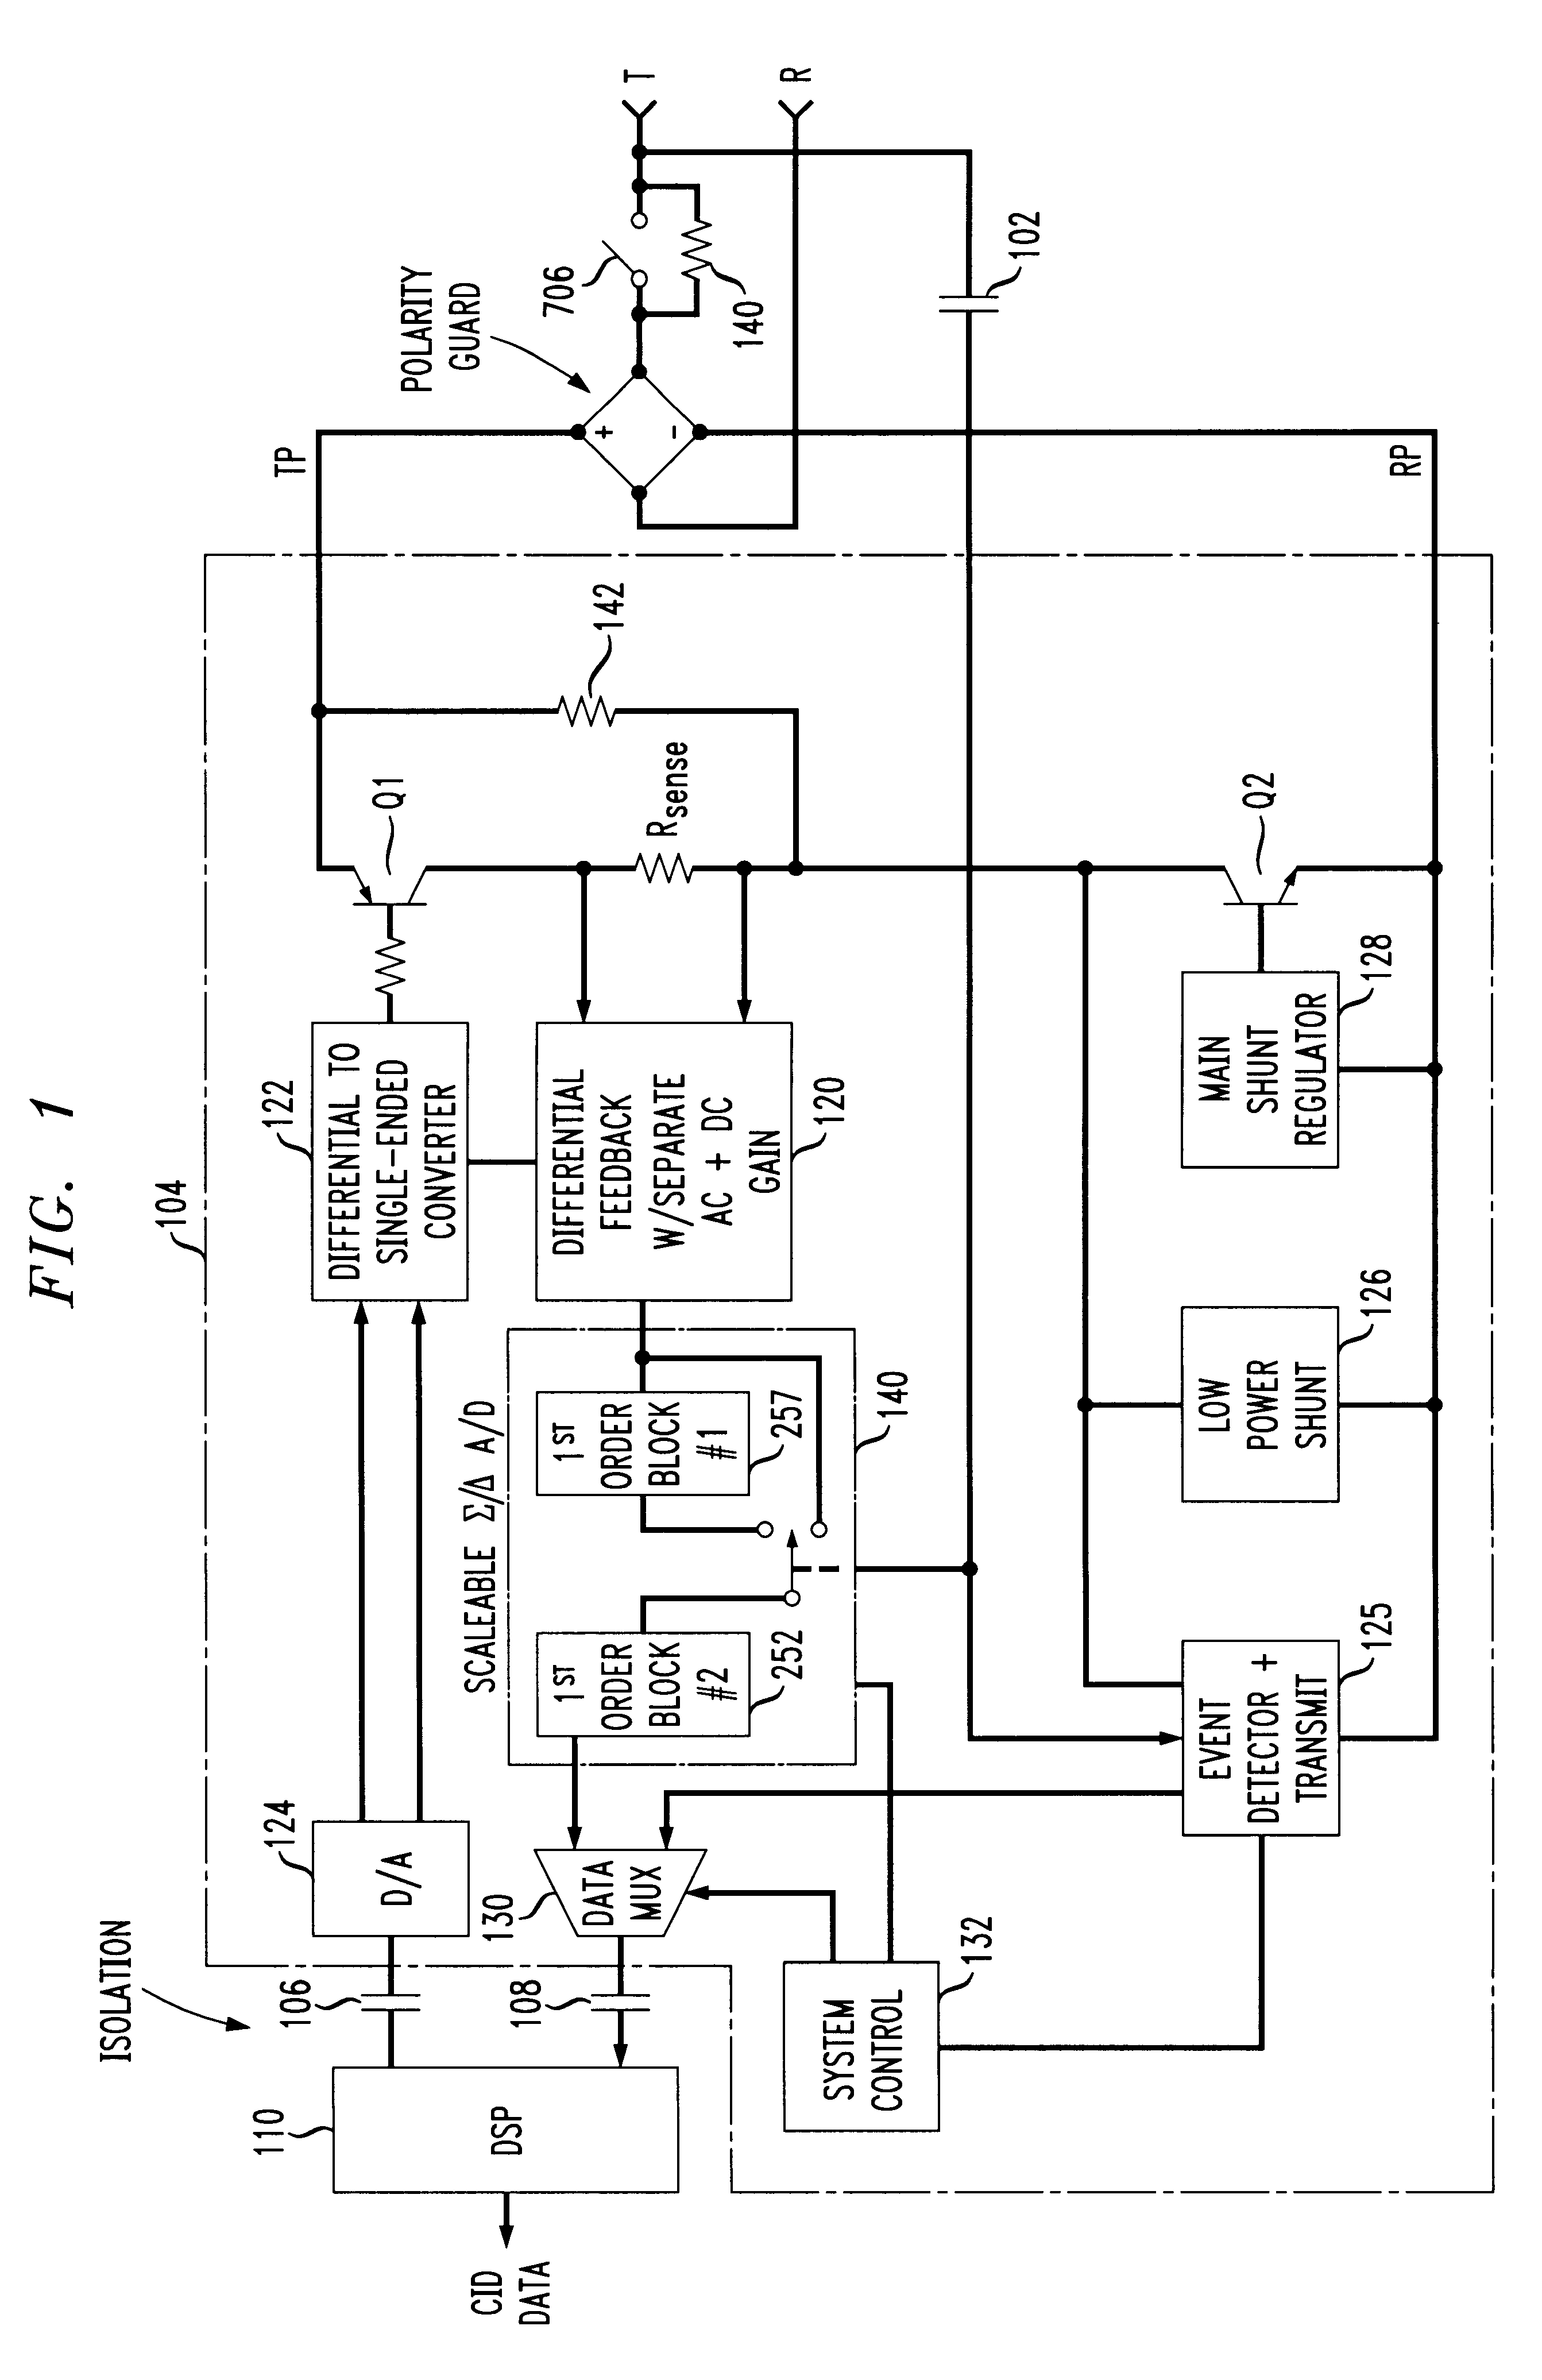 Call related information reception using sigma/delta modulation